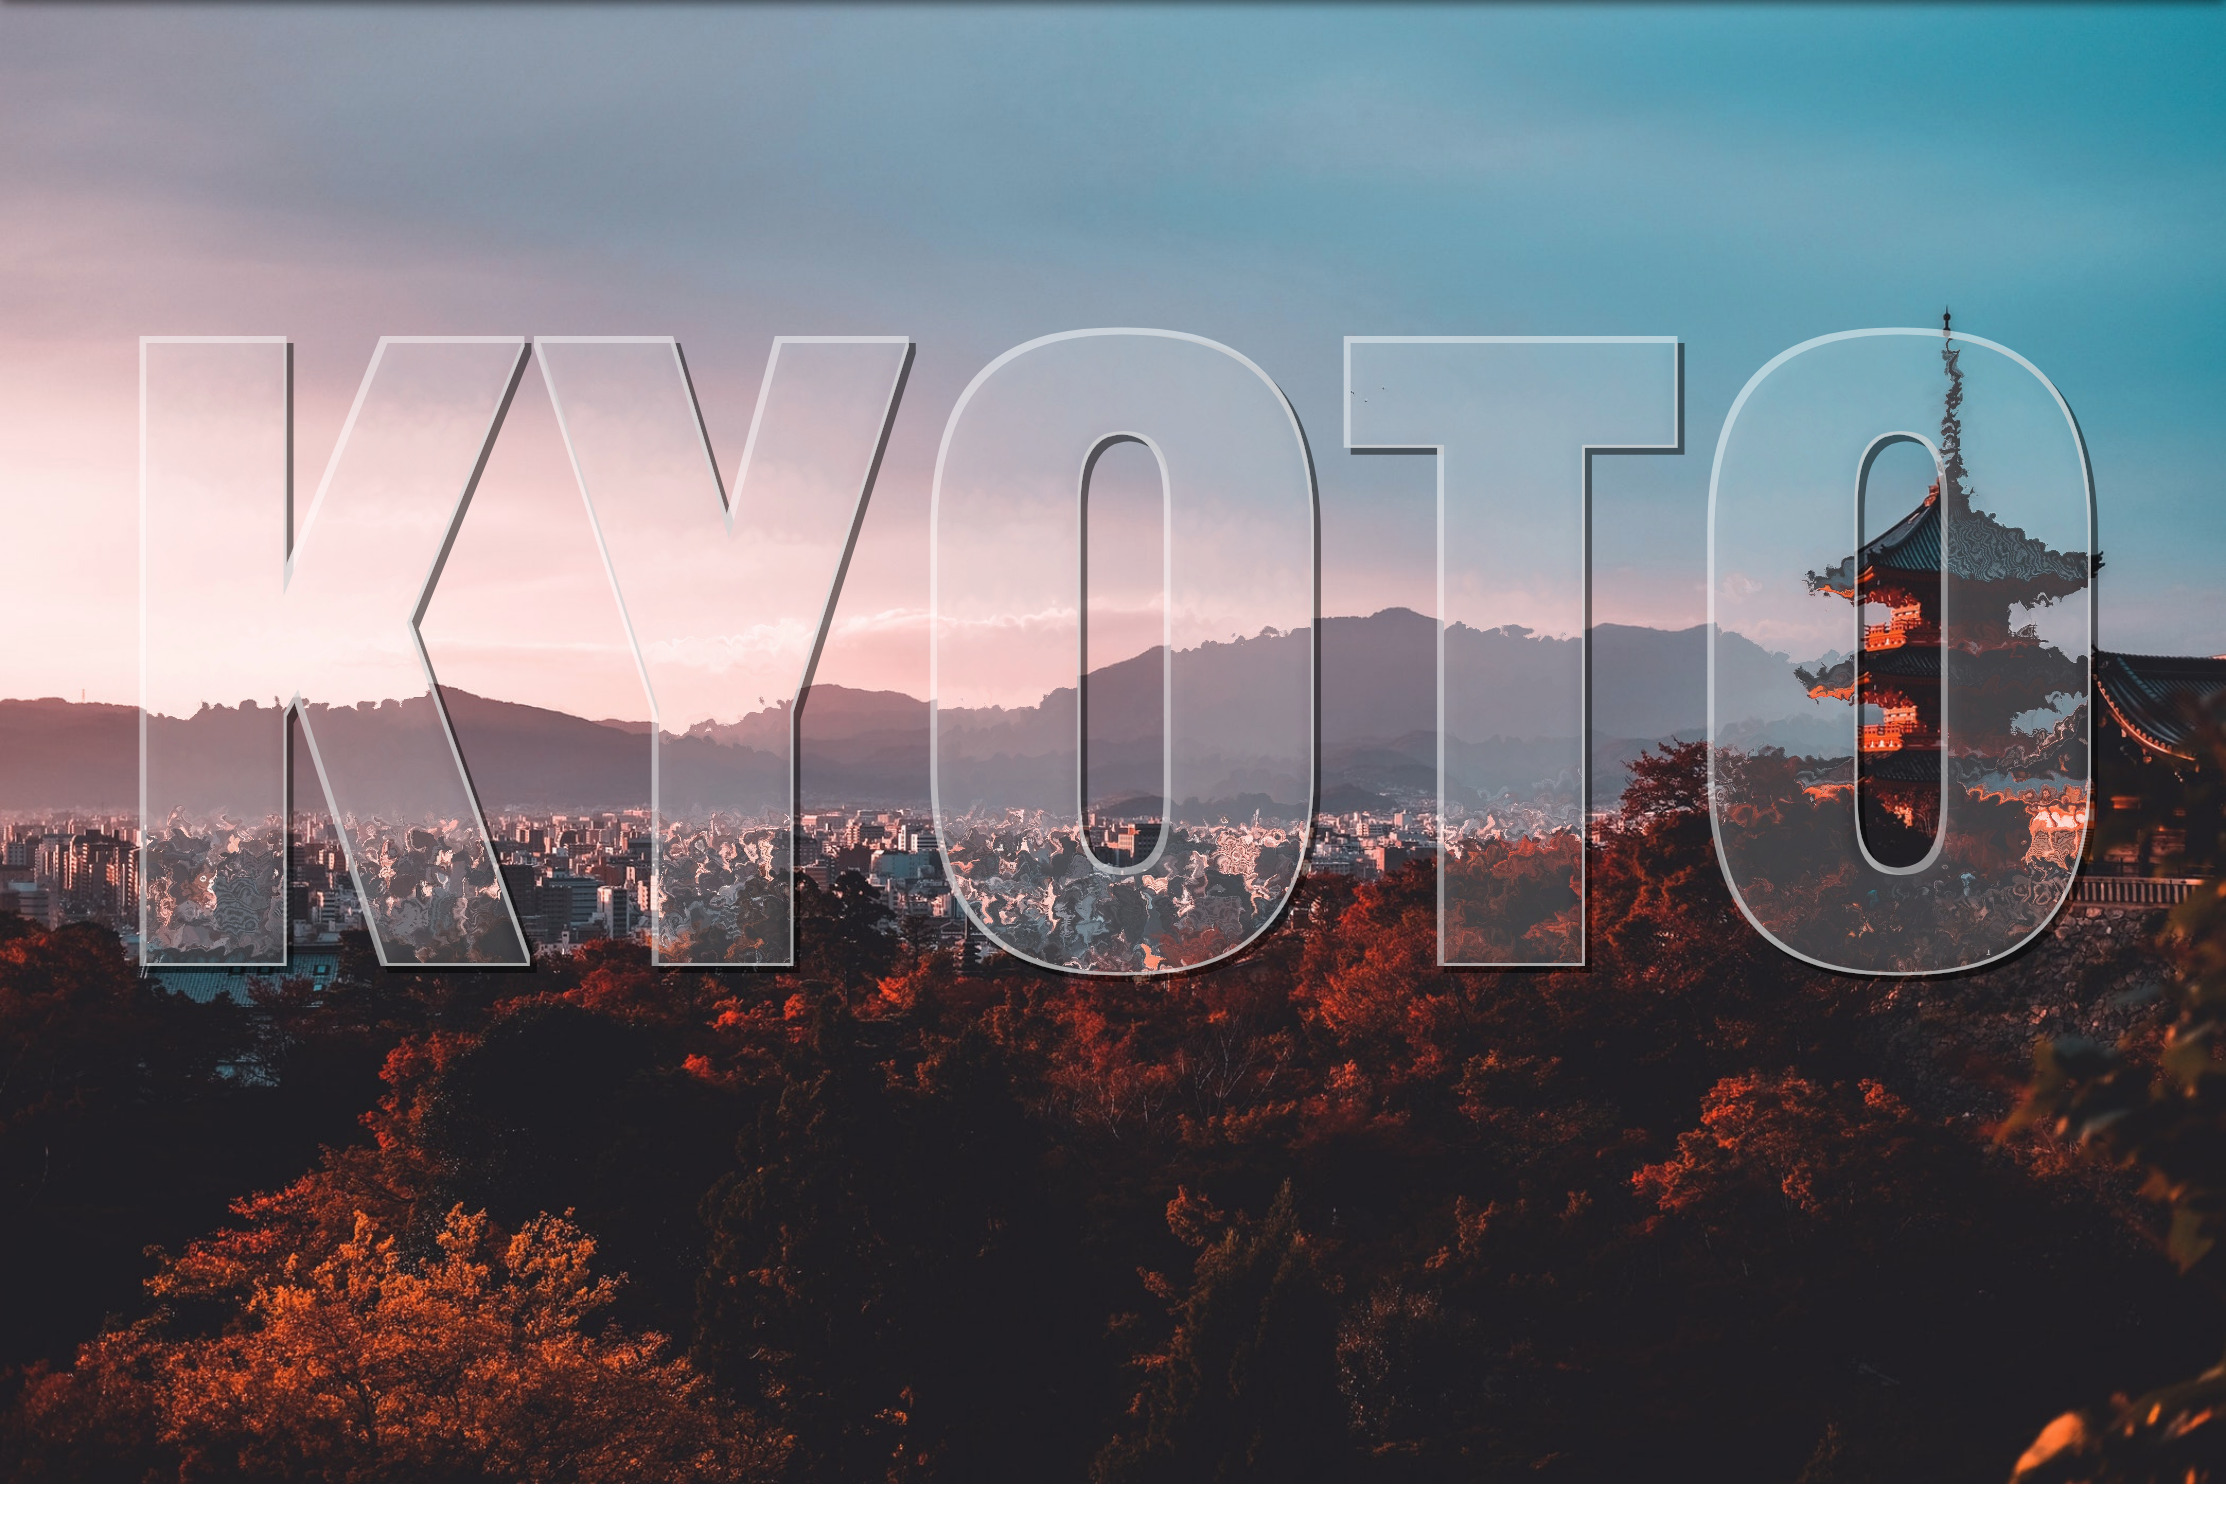 The word Kyoto that is translucent and stacked on top an image of the city.